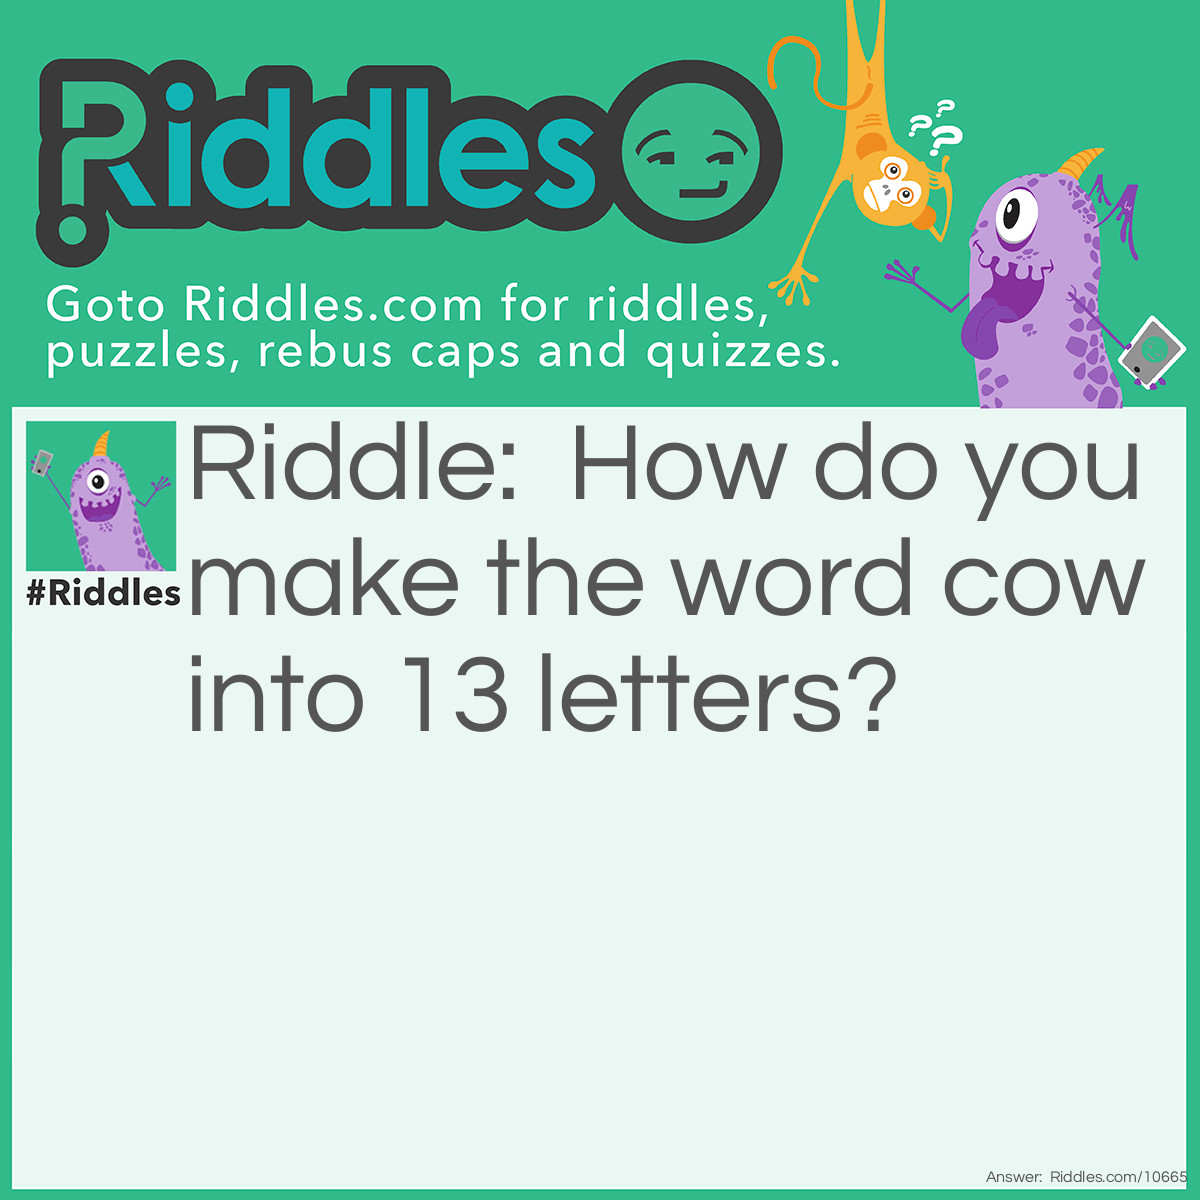 Riddle: How do you make the word cow into 13 letters? Answer: SEE O DOUBLE YOU.